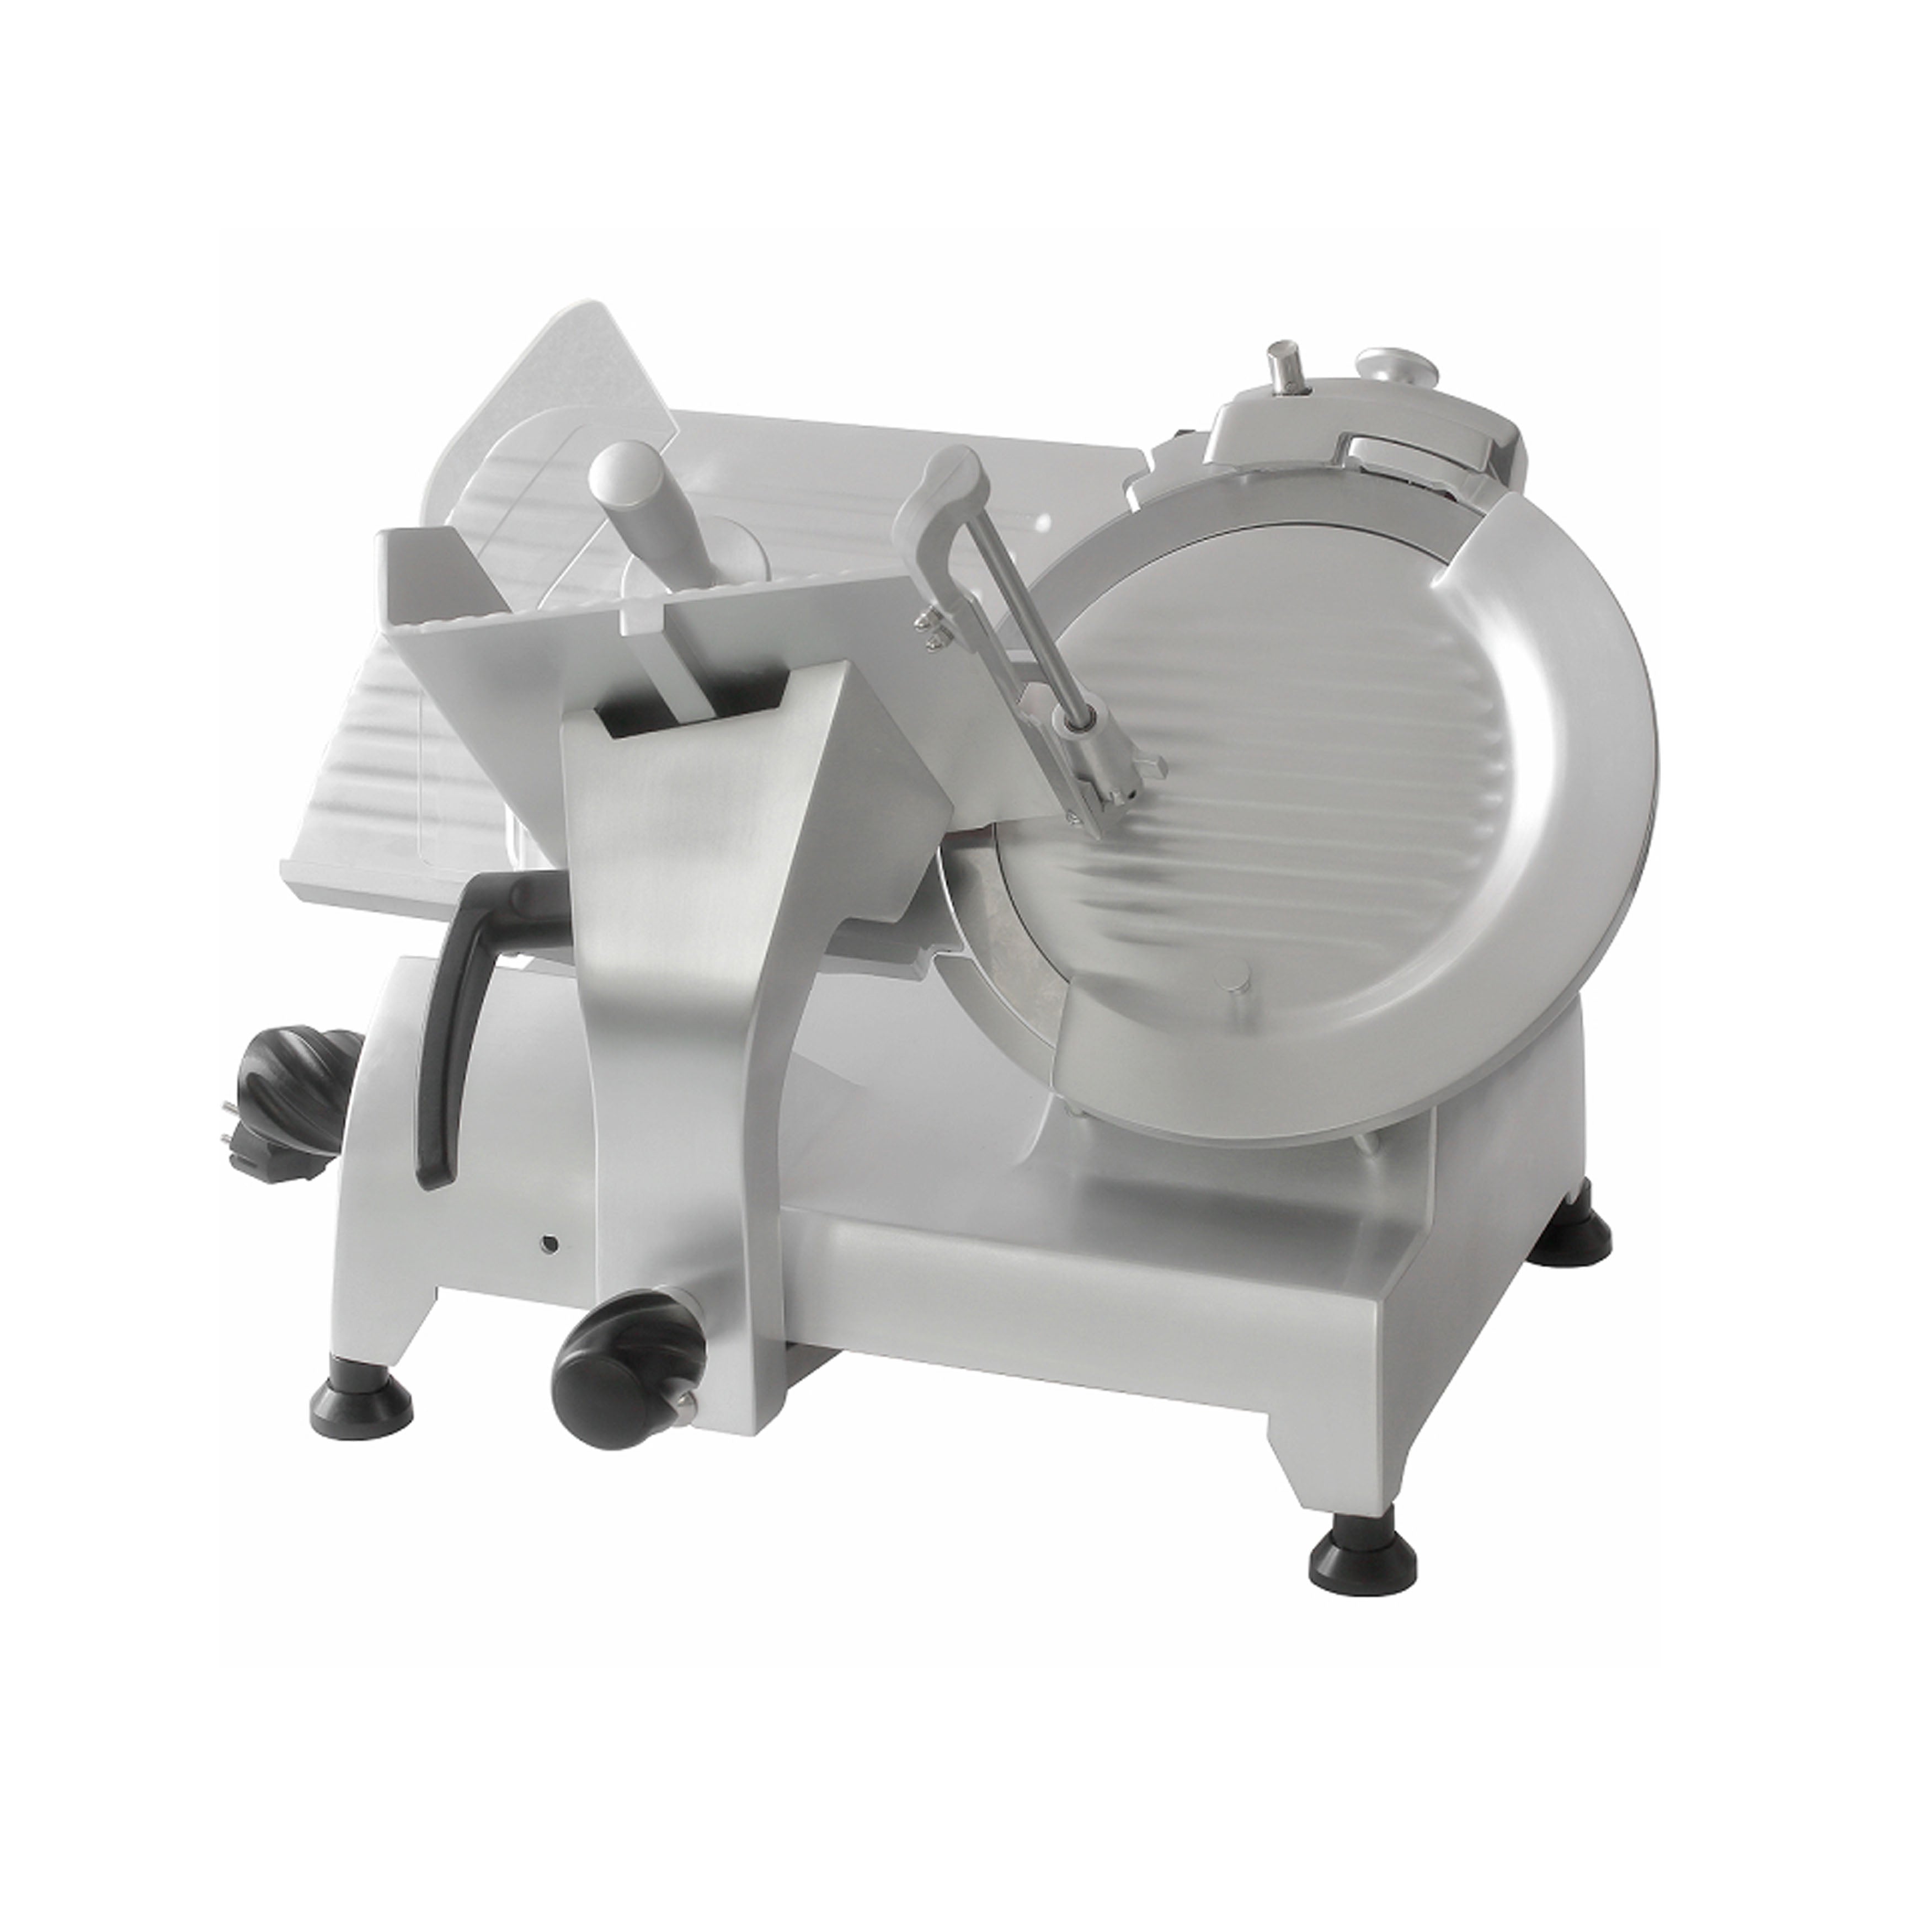 Paladin - 1A-FS412, Commercial 12'' Heavy Duty Manual Feed Meat Slicer